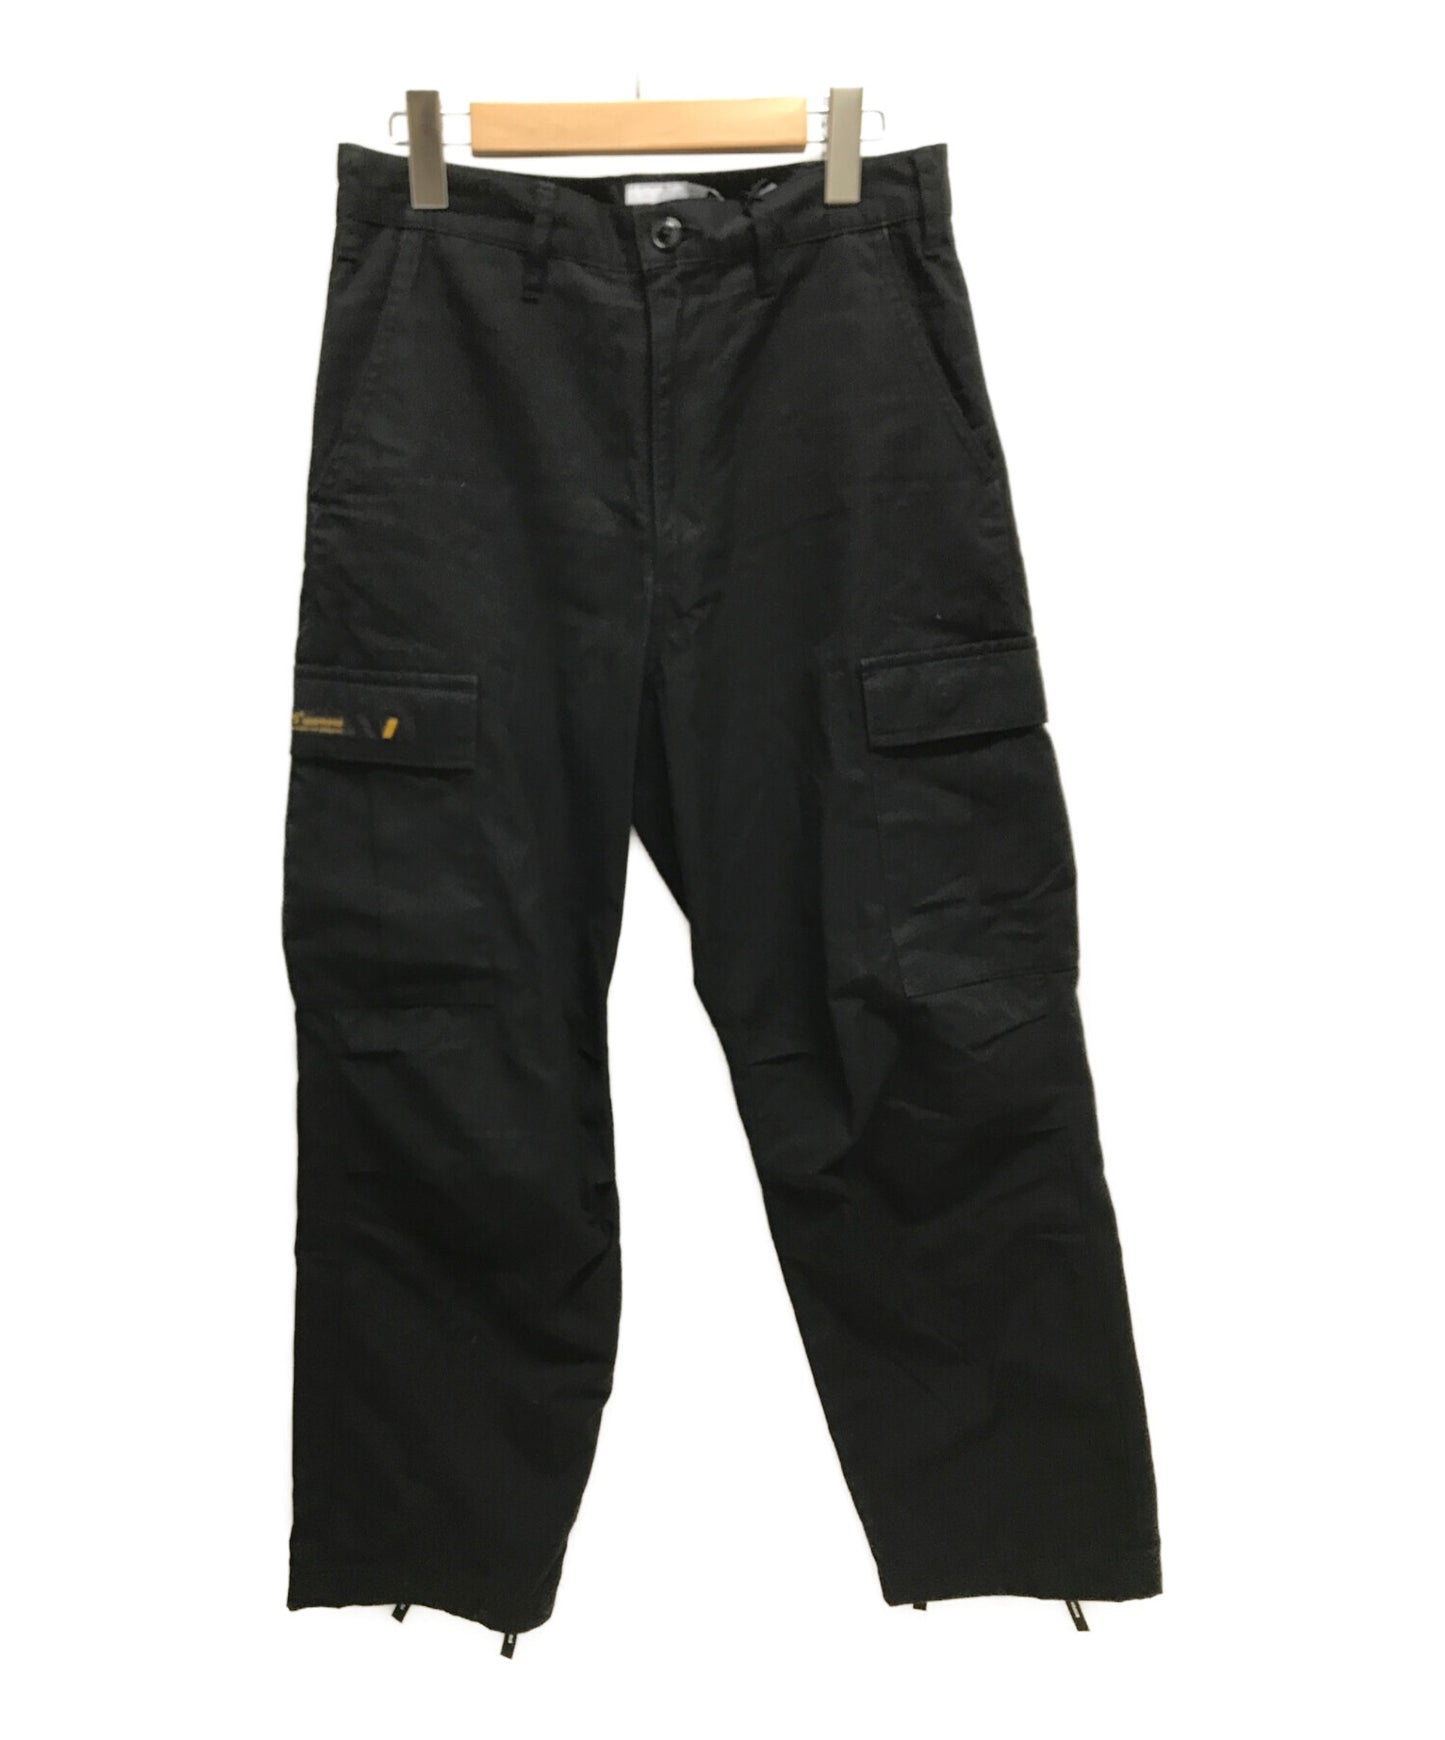 [Pre-owned] WTAPS JUNGLE STOCK TROUSERS COTTON.RIPSTOP cargo pants ripstop military 211wvdt-ptm02